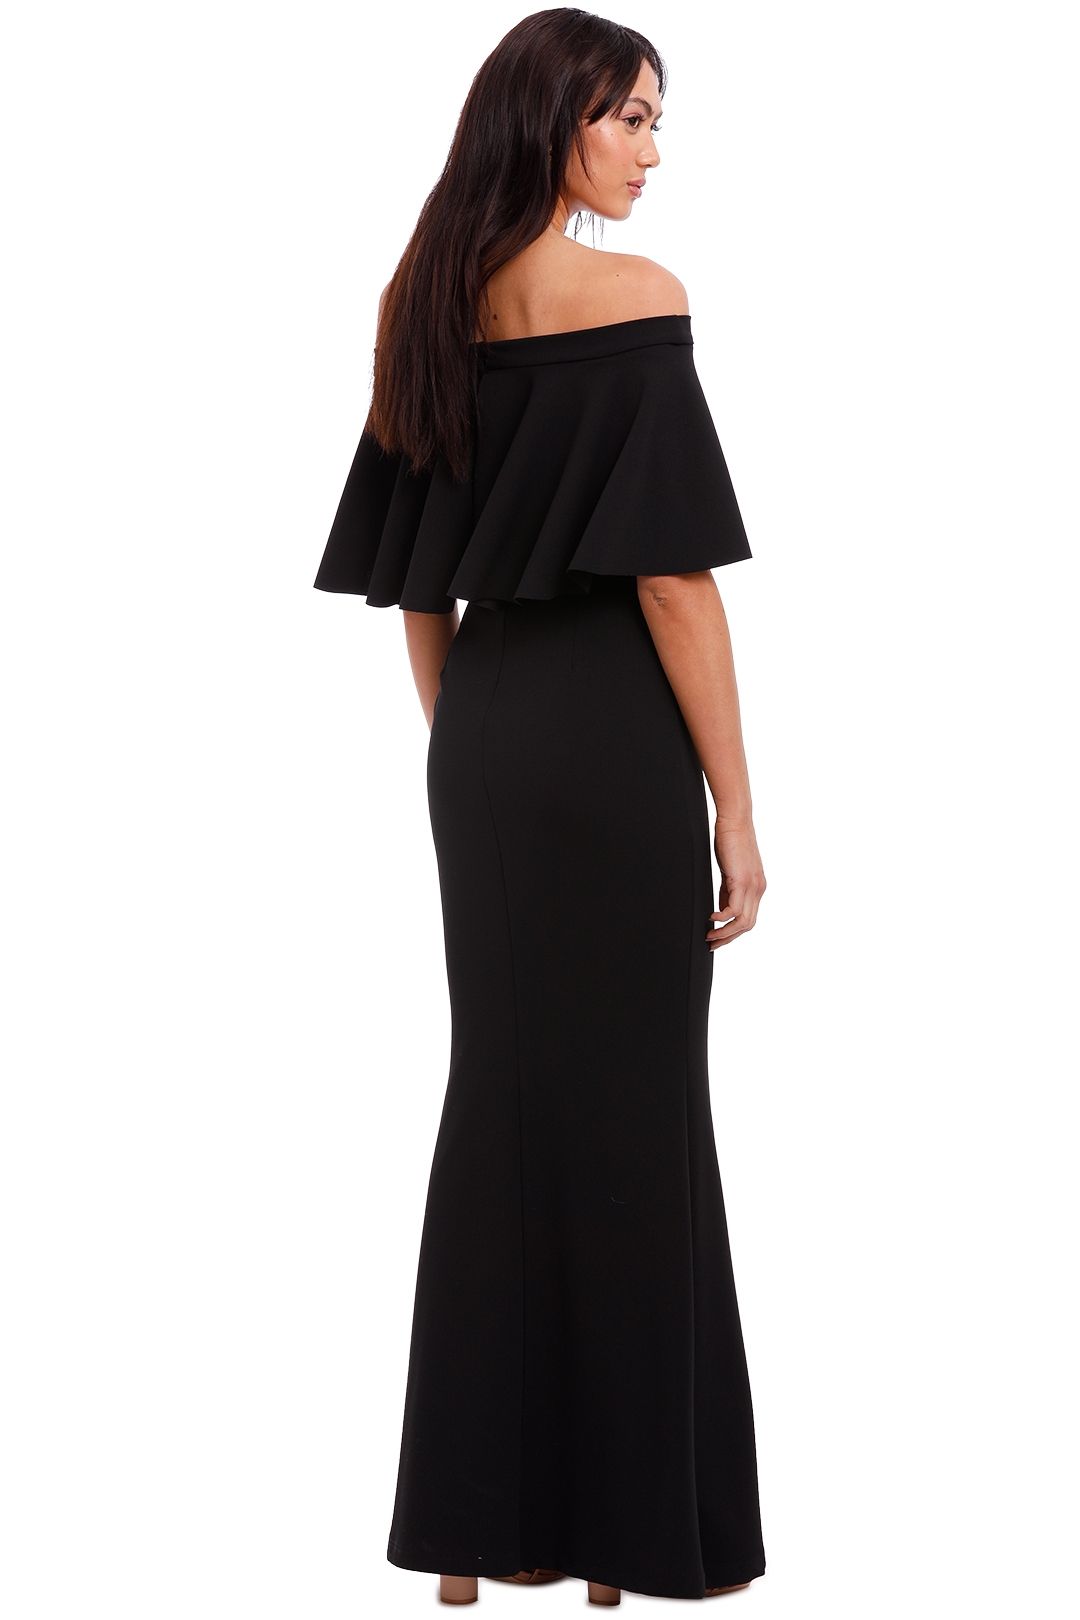 Envogue Gown in Black by Pasduchas for Hire | GlamCorner